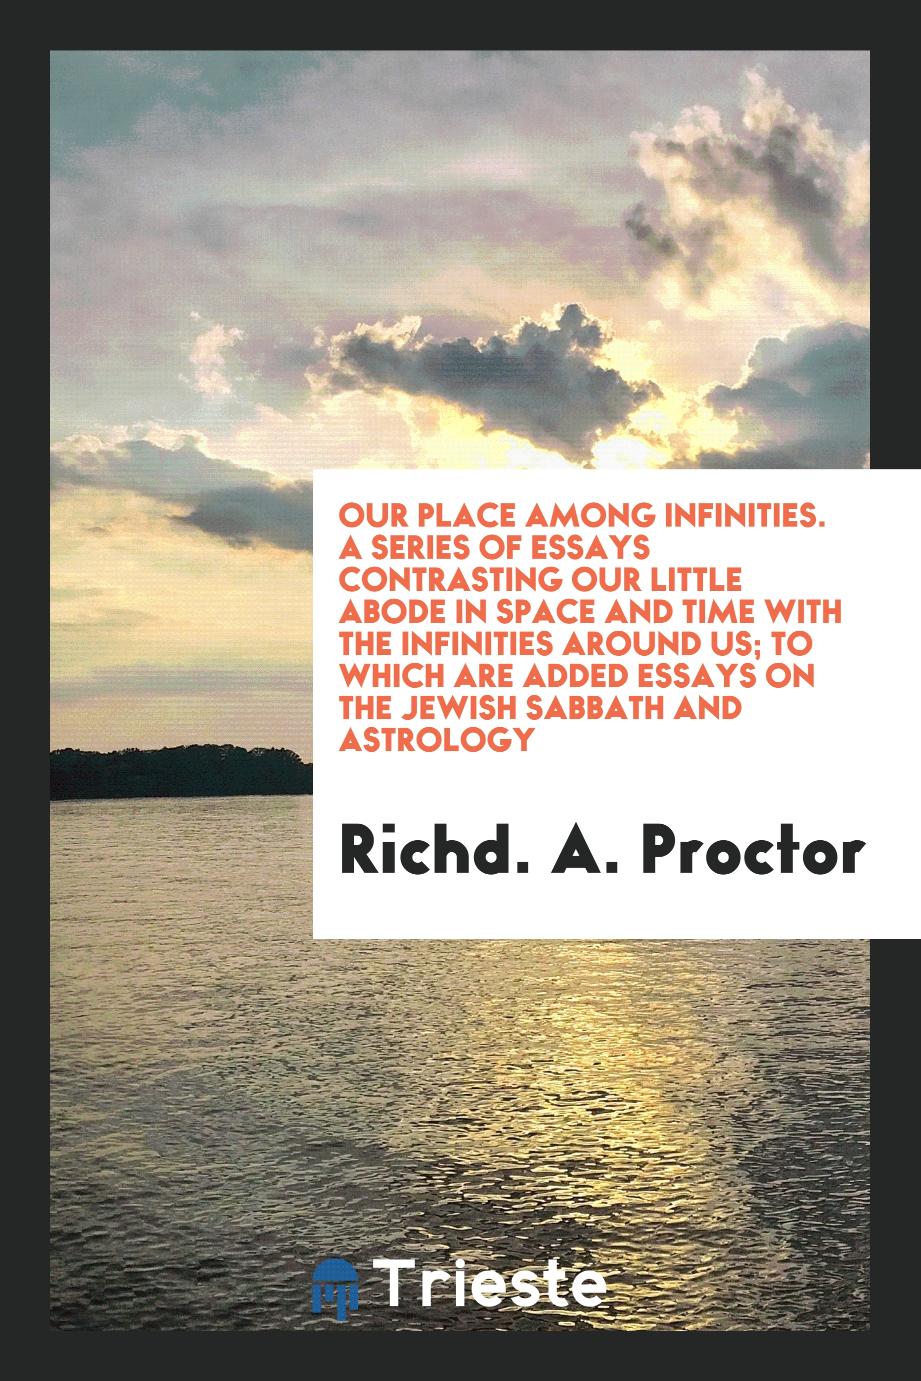 Our Place Among Infinities. A Series of Essays Contrasting Our Little Abode in Space and Time with the Infinities Around Us; To Which Are Added Essays on the Jewish Sabbath and Astrology